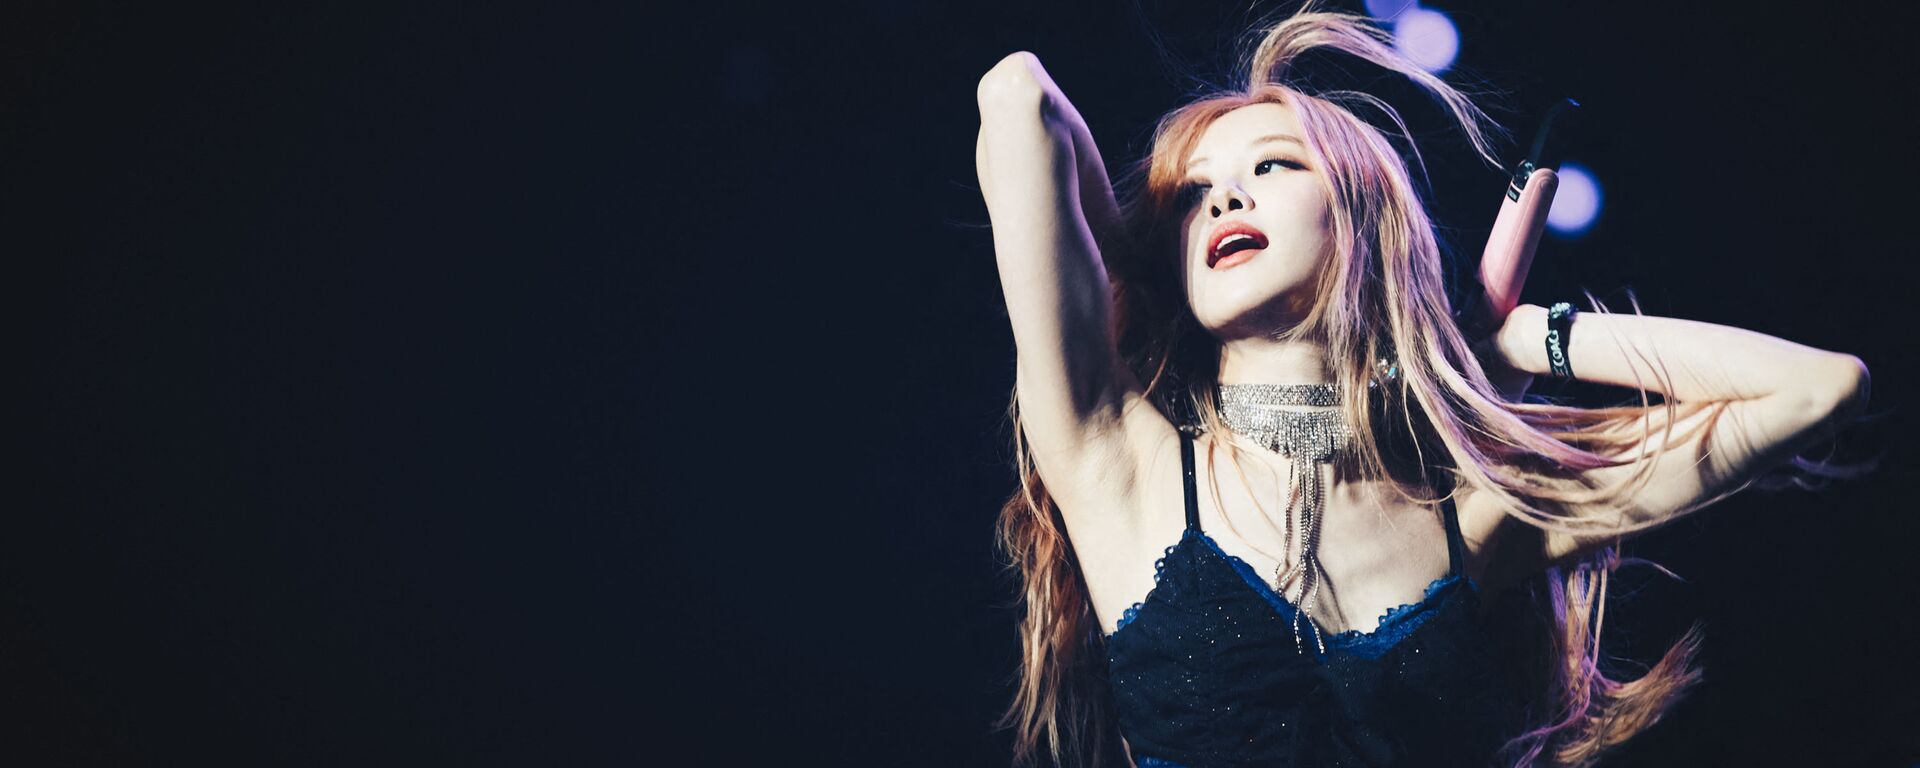 Rosé of BLACKPINK performs at Sahara Tent during the 2019 Coachella Valley Music And Arts Festival on April 12, 2019 in Indio, California.  - Sputnik Việt Nam, 1920, 27.06.2023